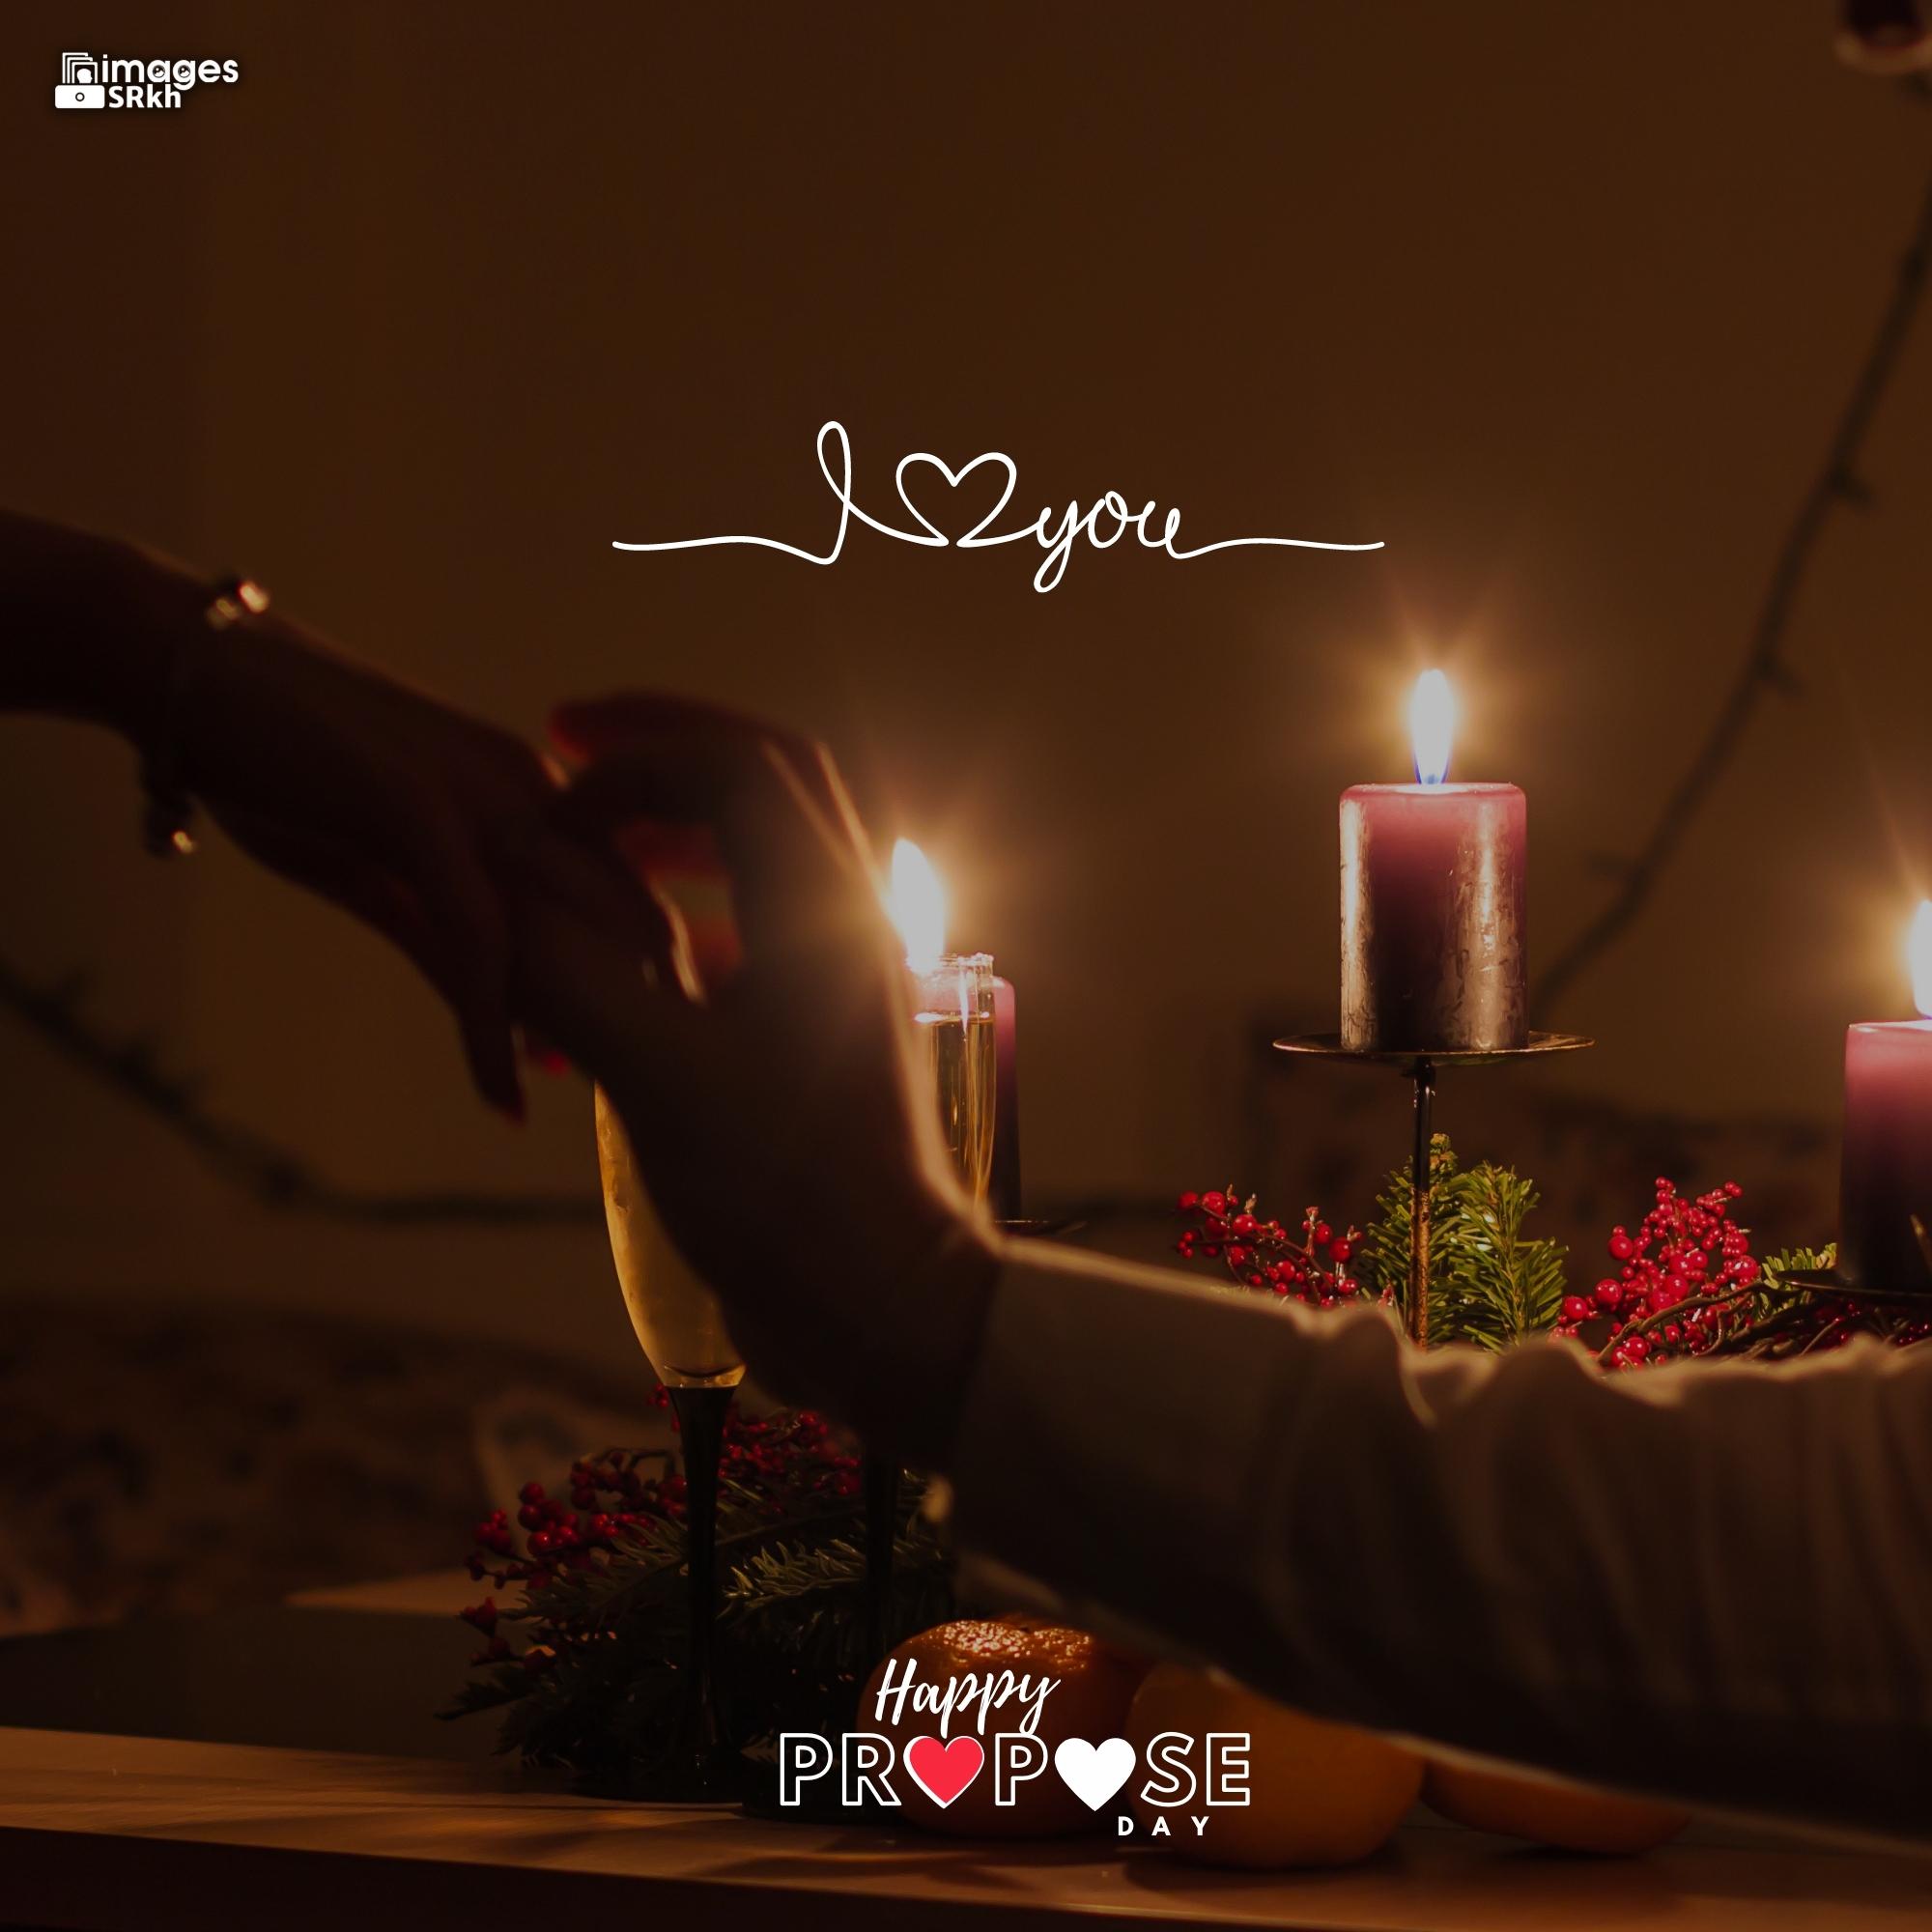 Happy Propose Day Images | 303 | I LOVE YOU